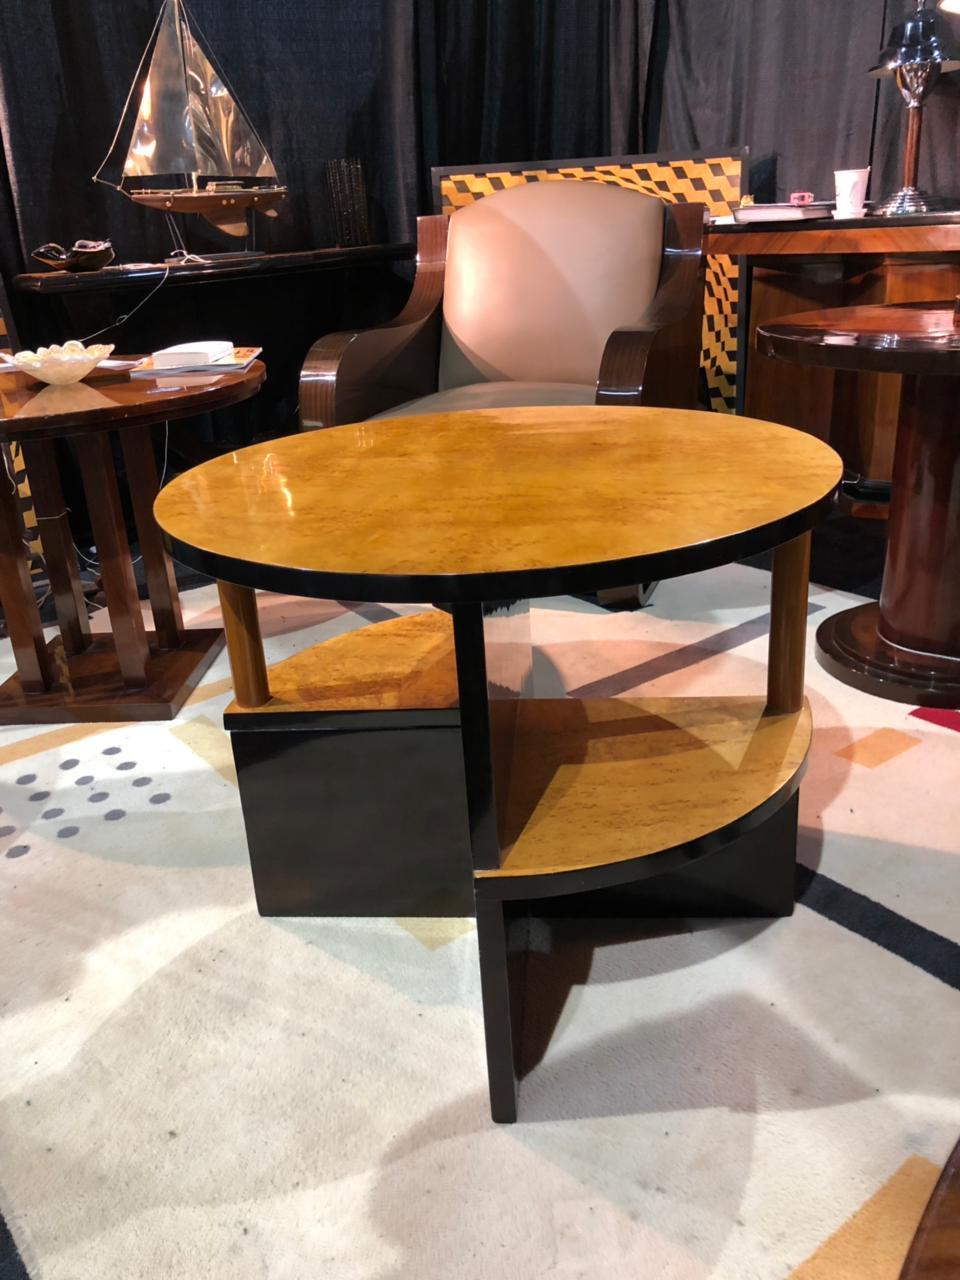 Amaizing Art Deco, 2 Tables in Wood, France, 1930 For Sale 9